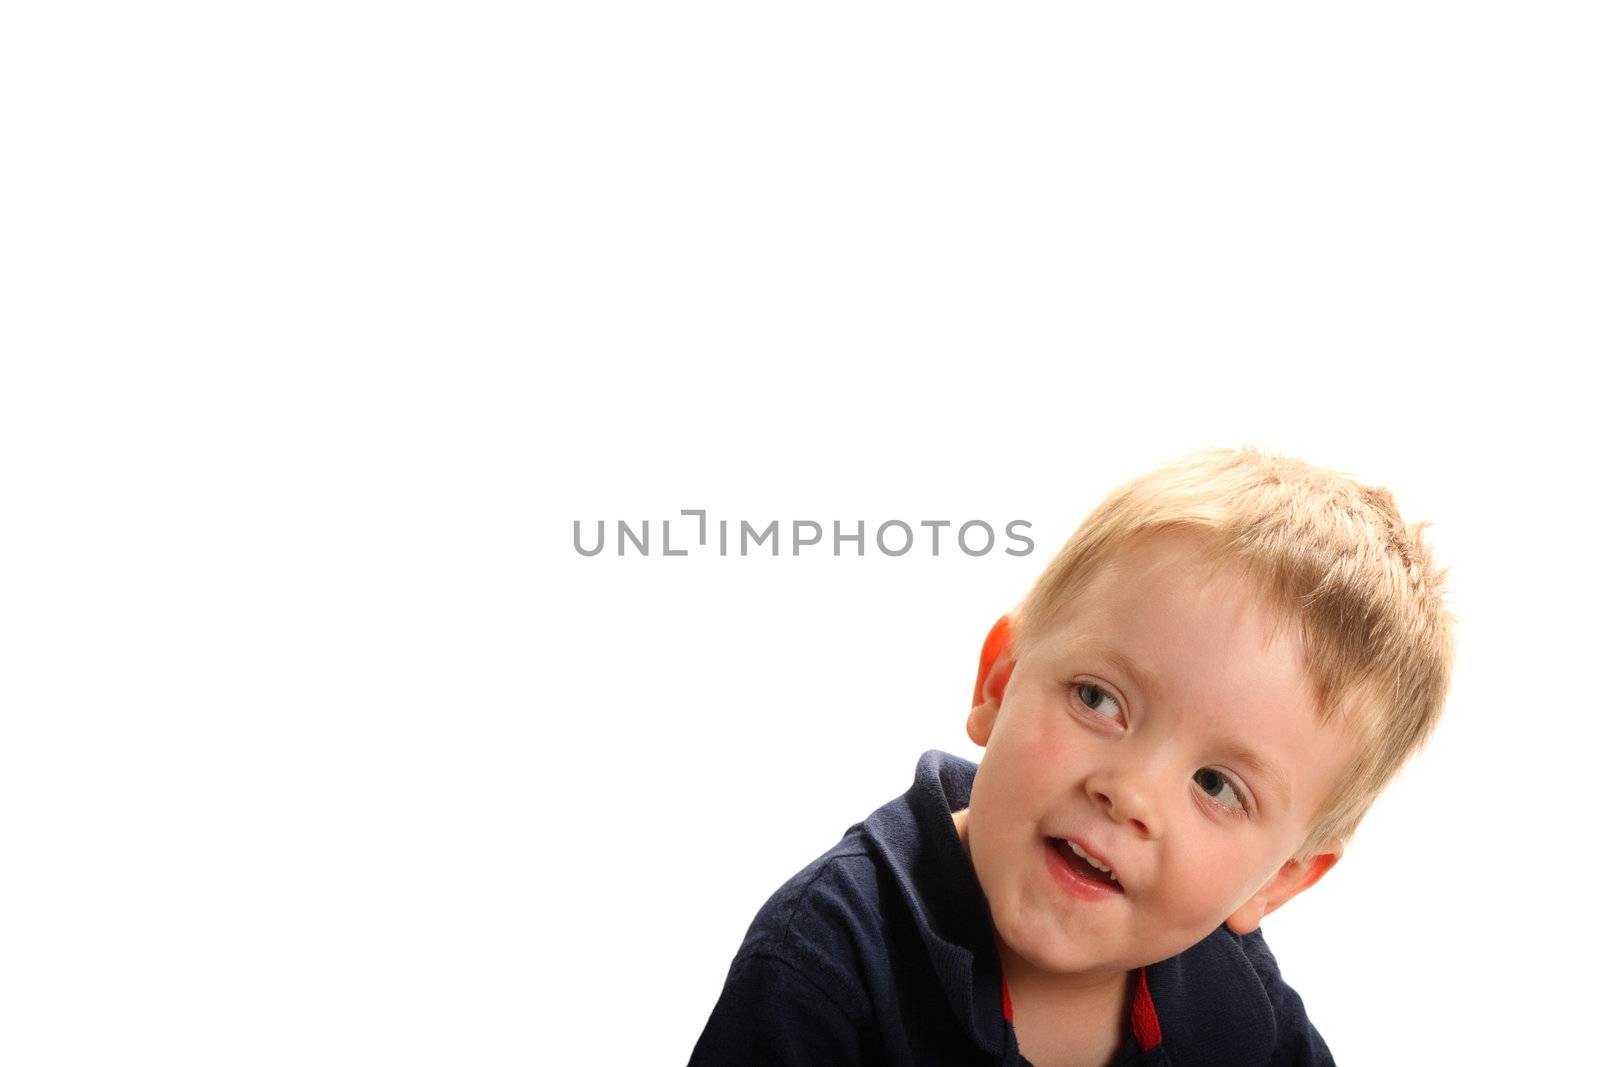 Cute smiling boy with blonde hair and green eyes looking up, isolated on white